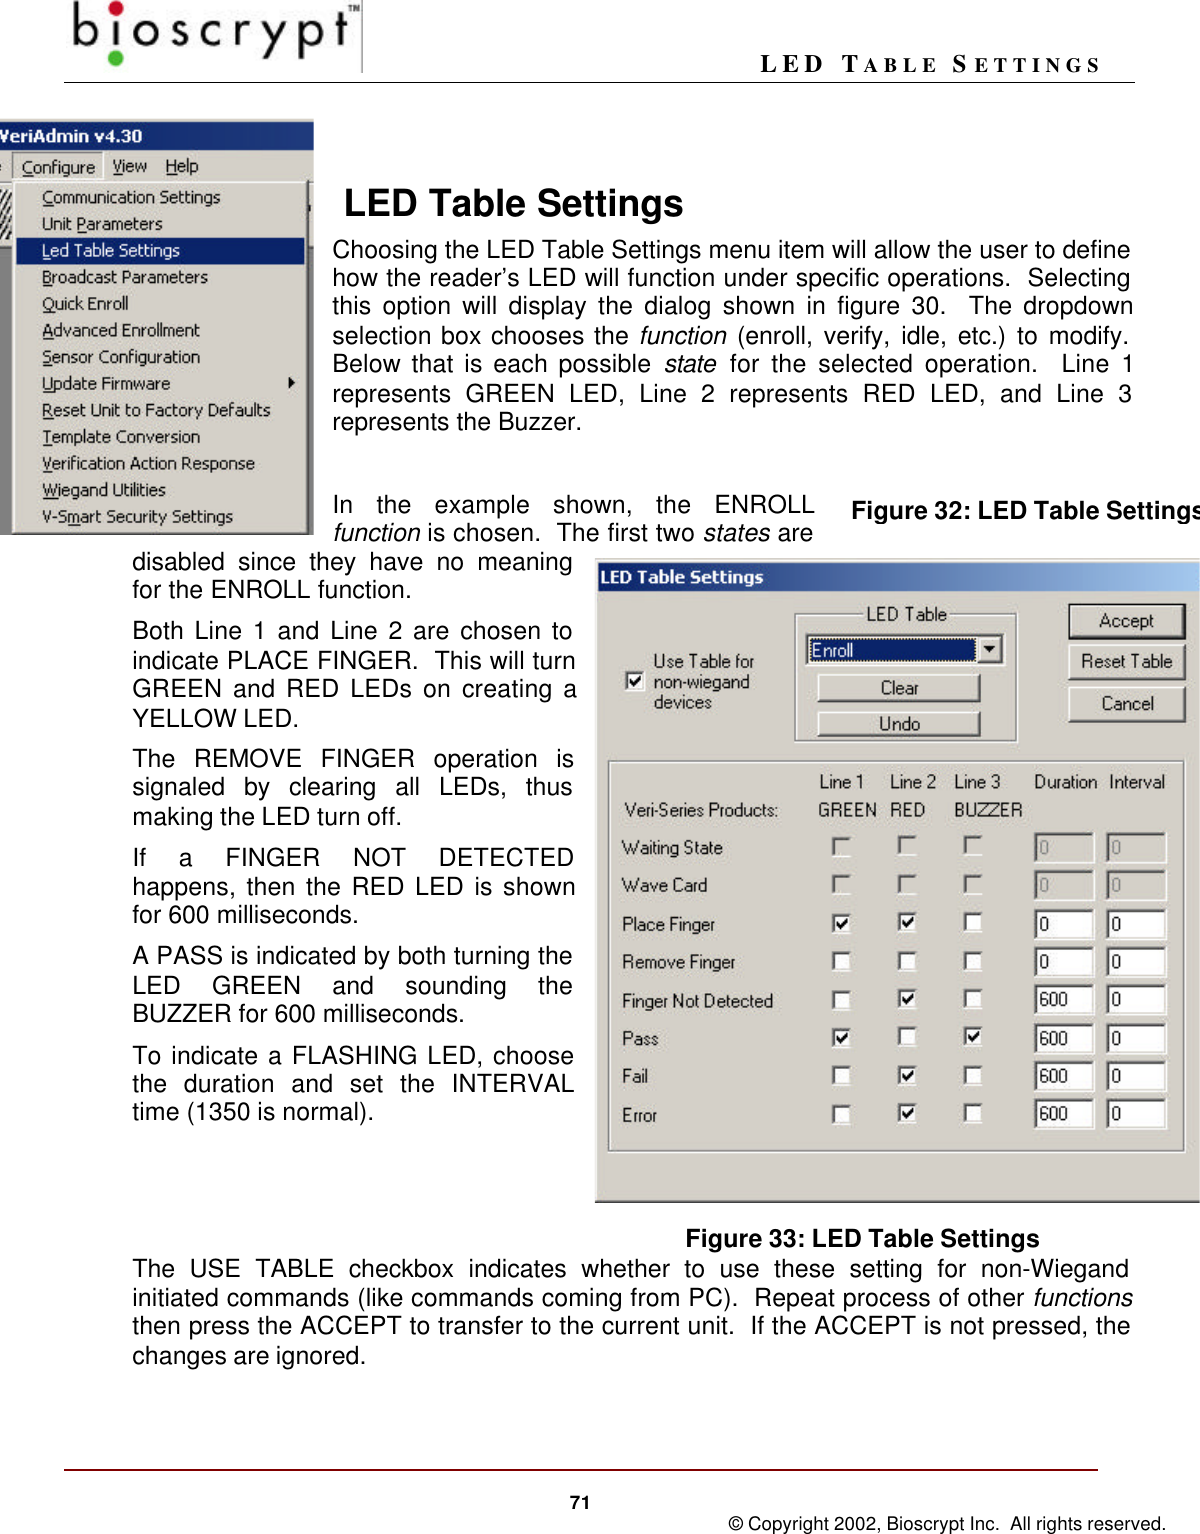 LED TABLE SETTINGS71 © Copyright 2002, Bioscrypt Inc.  All rights reserved.Figure 32: LED Table Settings LED Table SettingsChoosing the LED Table Settings menu item will allow the user to definehow the reader’s LED will function under specific operations.  Selectingthis option will display the dialog shown in figure 30.  The dropdownselection box chooses the function (enroll, verify, idle, etc.) to modify.Below that is each possible state for the selected operation.  Line 1represents GREEN LED, Line 2 represents RED LED, and Line 3represents the Buzzer.In the example shown, the ENROLLfunction is chosen.  The first two states aredisabled since they have no meaningfor the ENROLL function.Both Line 1 and Line 2 are chosen toindicate PLACE FINGER.  This will turnGREEN and RED LEDs on creating aYELLOW LED.The REMOVE FINGER operation issignaled by clearing all LEDs, thusmaking the LED turn off.If a FINGER NOT DETECTEDhappens, then the RED LED is shownfor 600 milliseconds.A PASS is indicated by both turning theLED GREEN and sounding theBUZZER for 600 milliseconds.To indicate a FLASHING LED, choosethe duration and set the INTERVALtime (1350 is normal).Figure 33: LED Table SettingsThe USE TABLE checkbox indicates whether to use these setting for non-Wiegandinitiated commands (like commands coming from PC).  Repeat process of other functionsthen press the ACCEPT to transfer to the current unit.  If the ACCEPT is not pressed, thechanges are ignored.